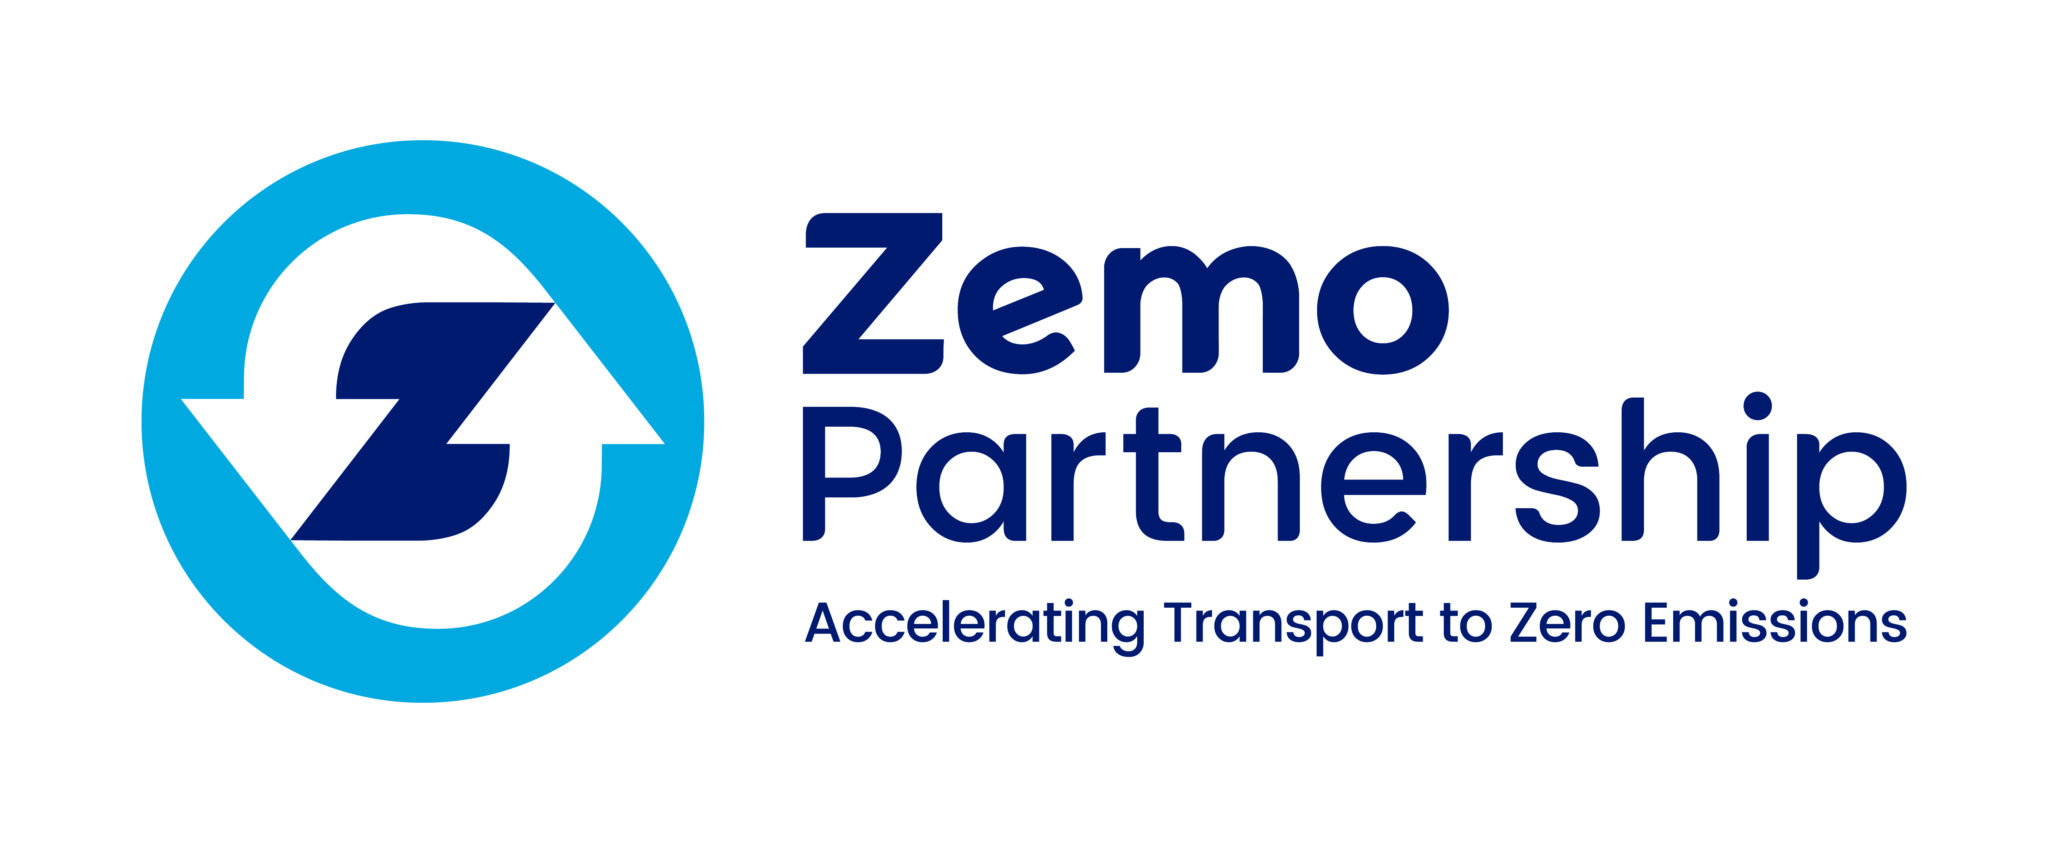 NFDA Attends Zemo Partnership Meeting on the Formation of the Net Zero Transport Council